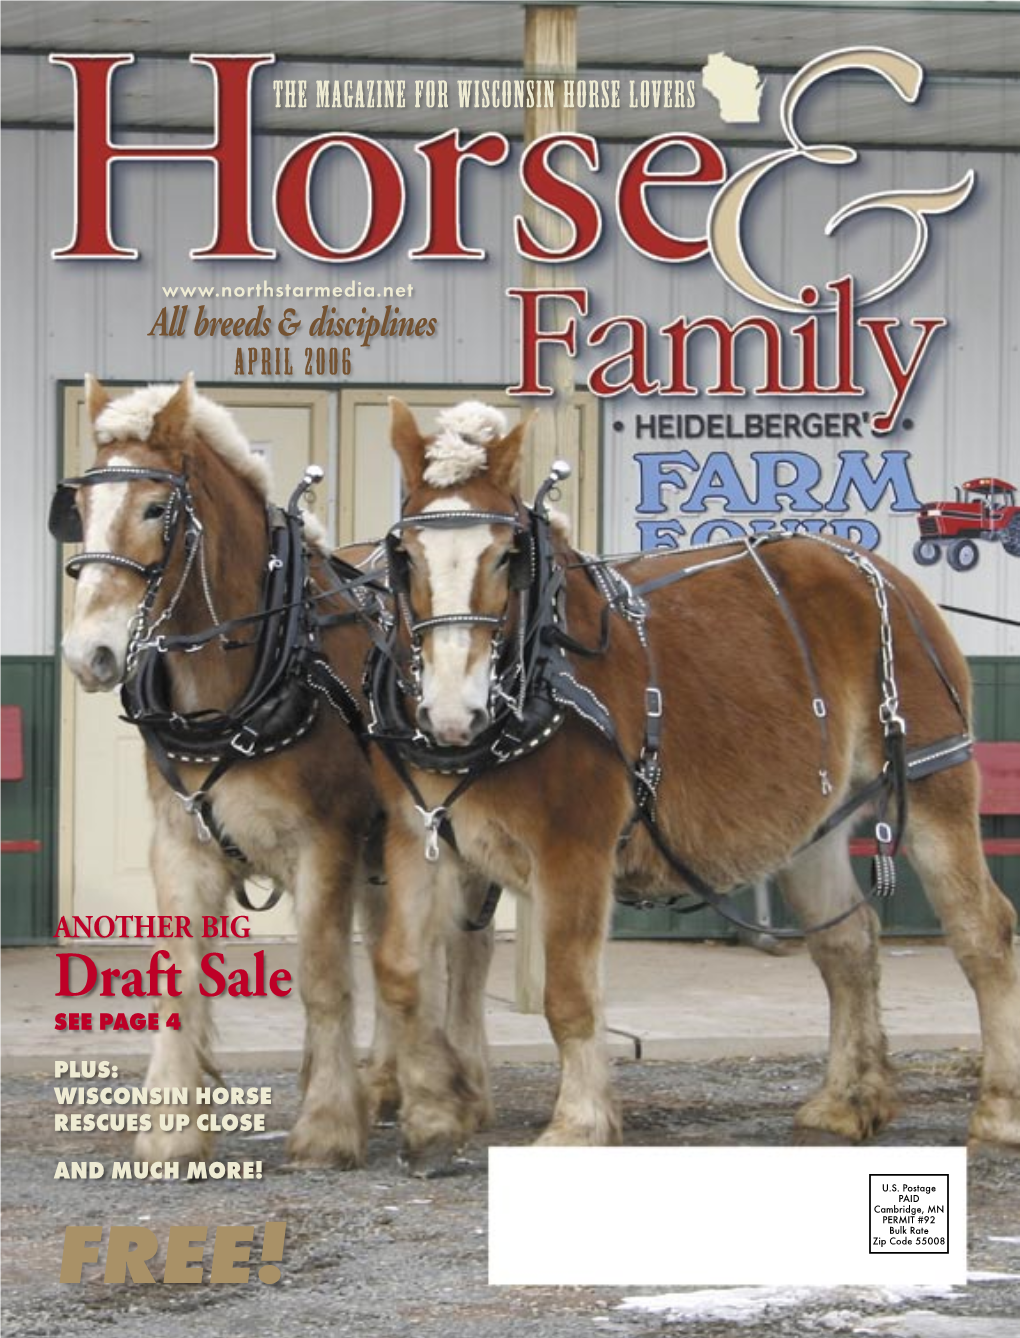 Draft Sale SEE PAGE 4 PLUS: WISCONSIN HORSE RESCUES up CLOSE and MUCH MORE! U.S